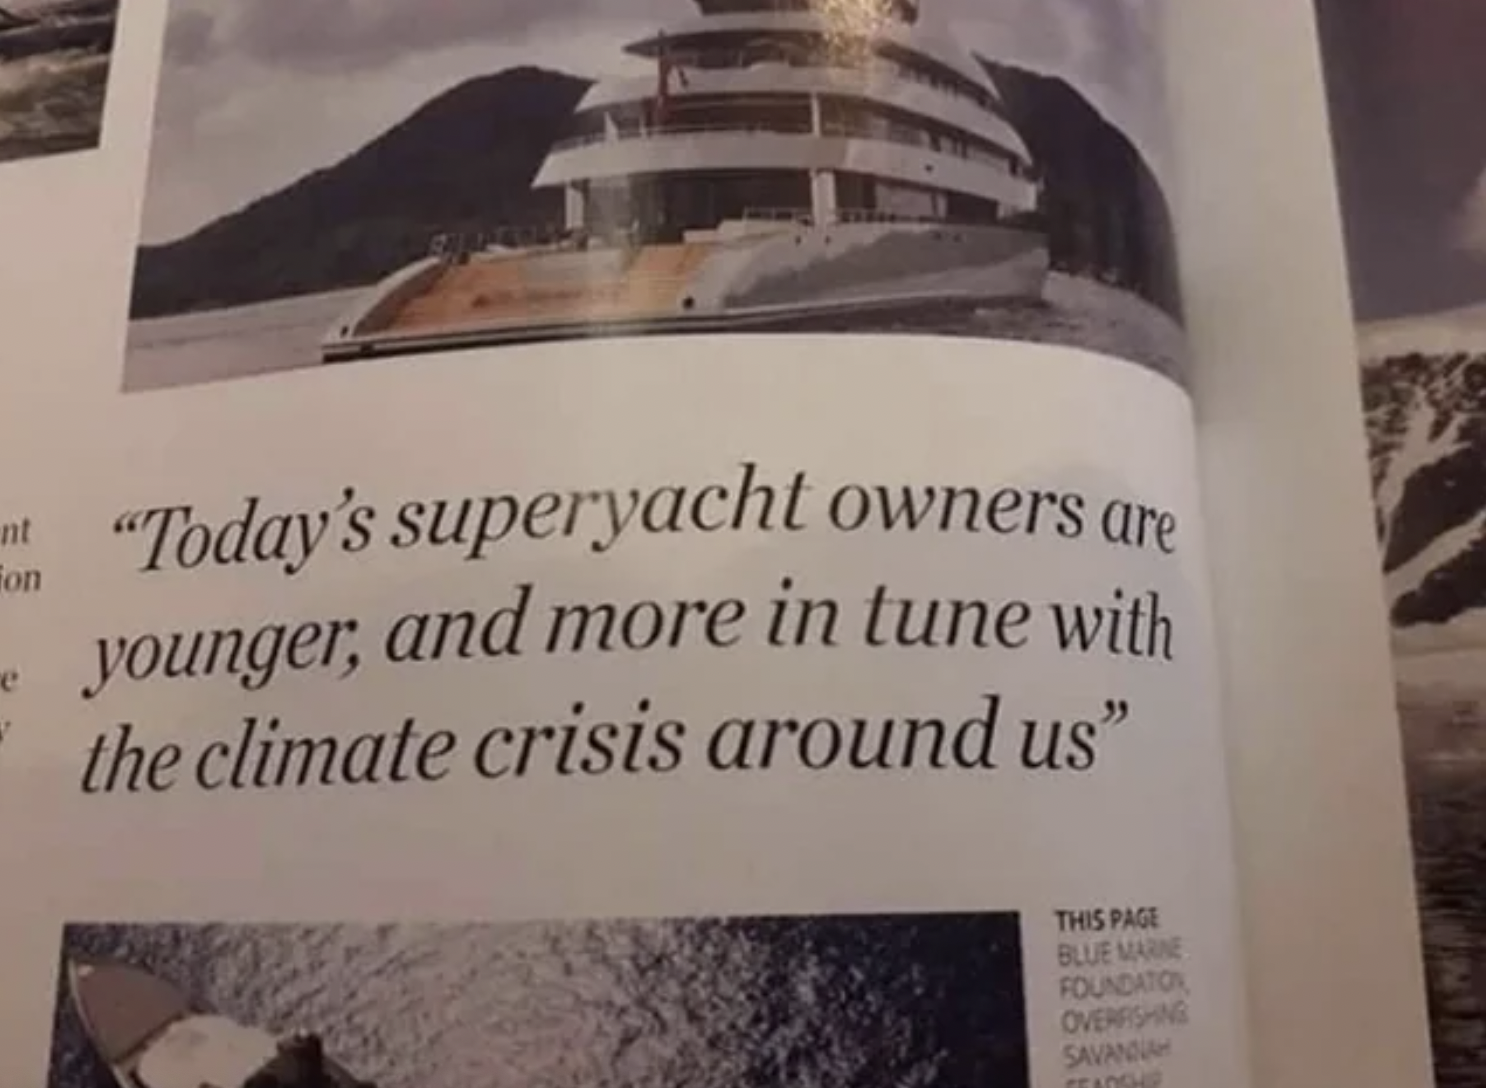 poster - Fon "Today's superyacht owners are younger, and more in tune with the climate crisis around us" This Page Blue Marne Foundation Overrishing Savana Teadshe